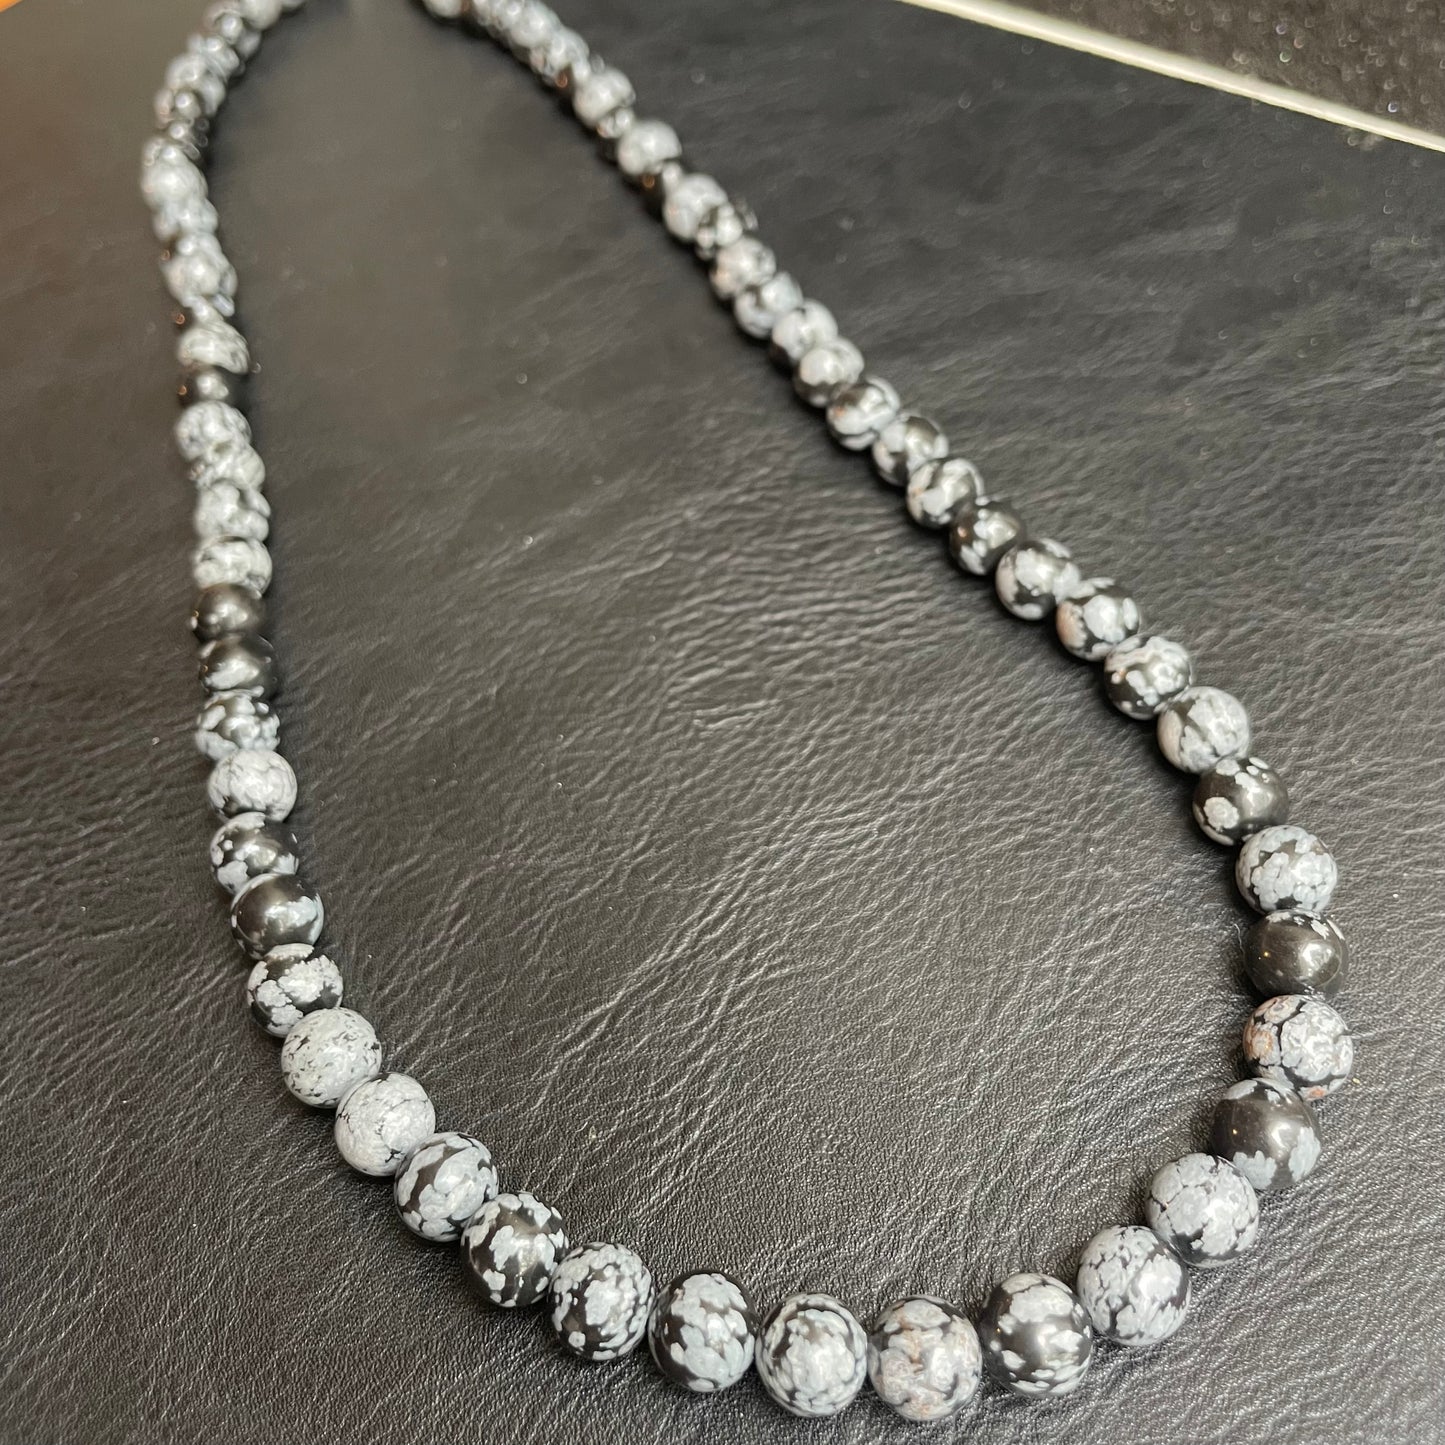 Snowflake Obsidian 8mm necklace